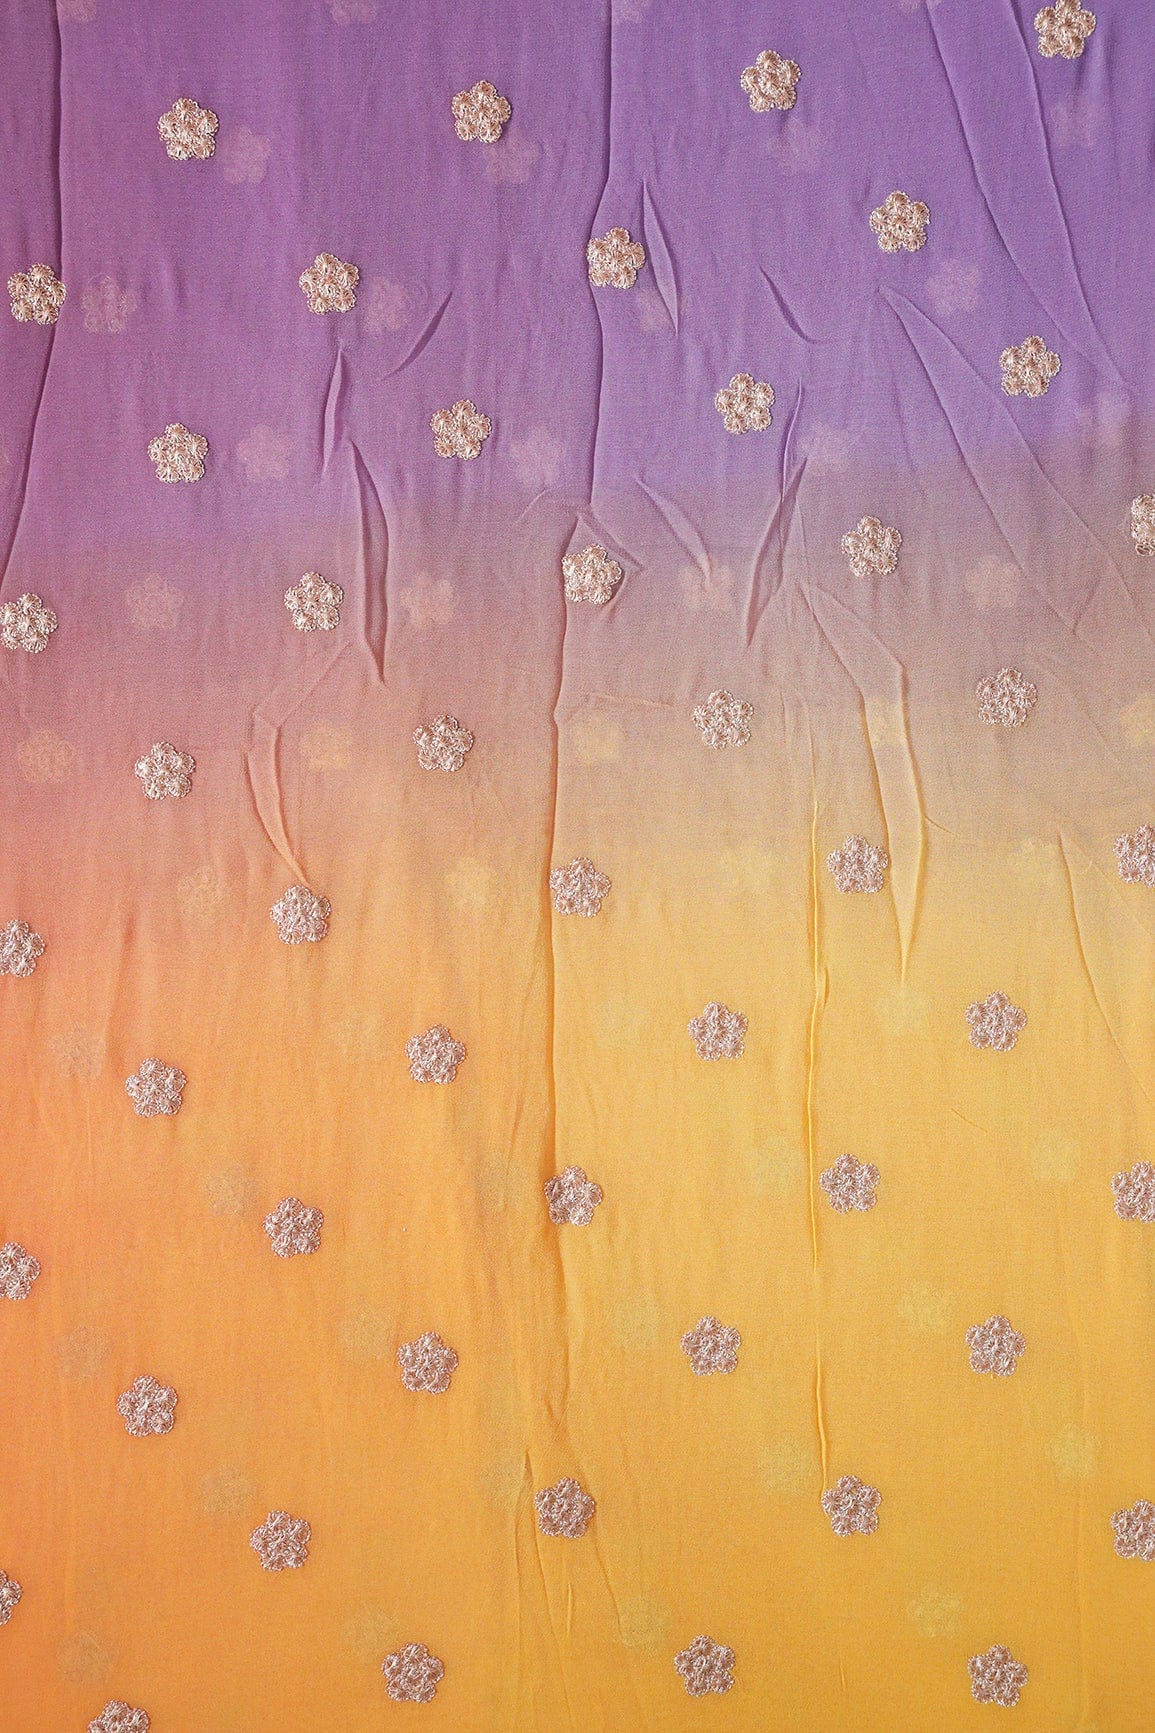 doeraa Embroidery Fabrics 4 Meter Cut Piece Of Gold Zari Small Floral Embroidery On Multi Color Viscose Georgette Fabric